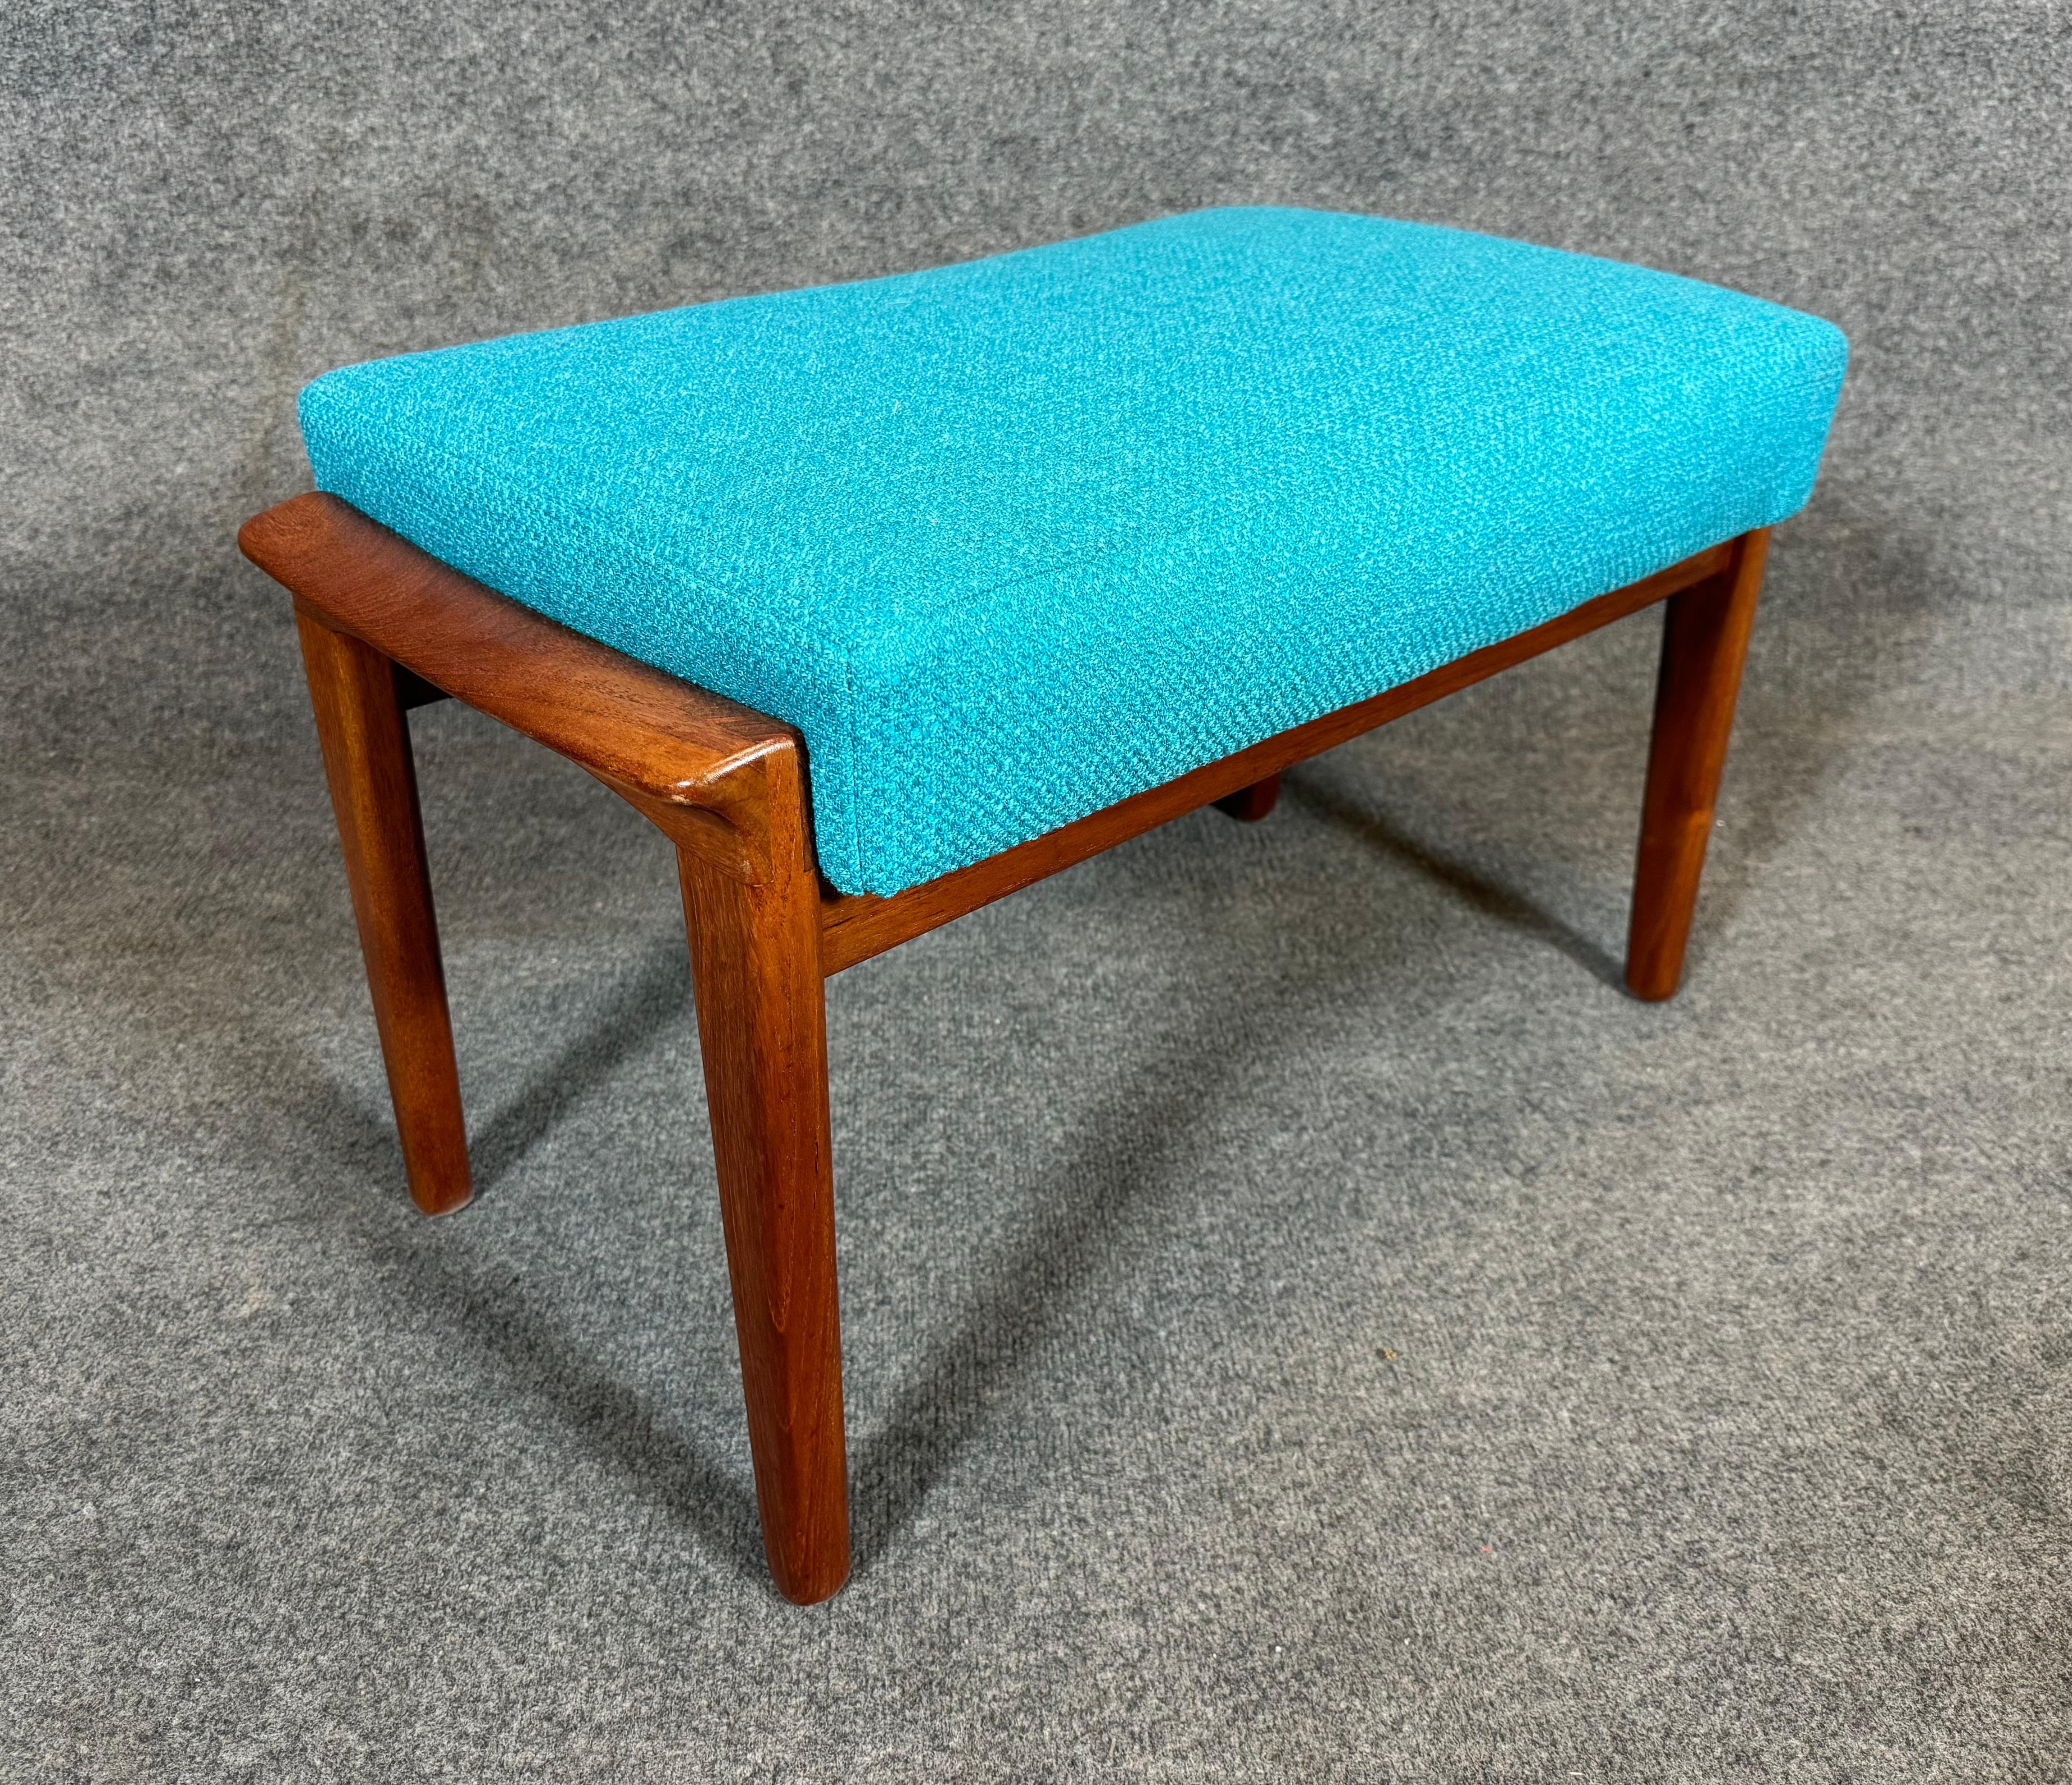 Vintage Danish Mid Century Modern Teak Lounge Chair and Ottoman by Grete Jalk For Sale 5